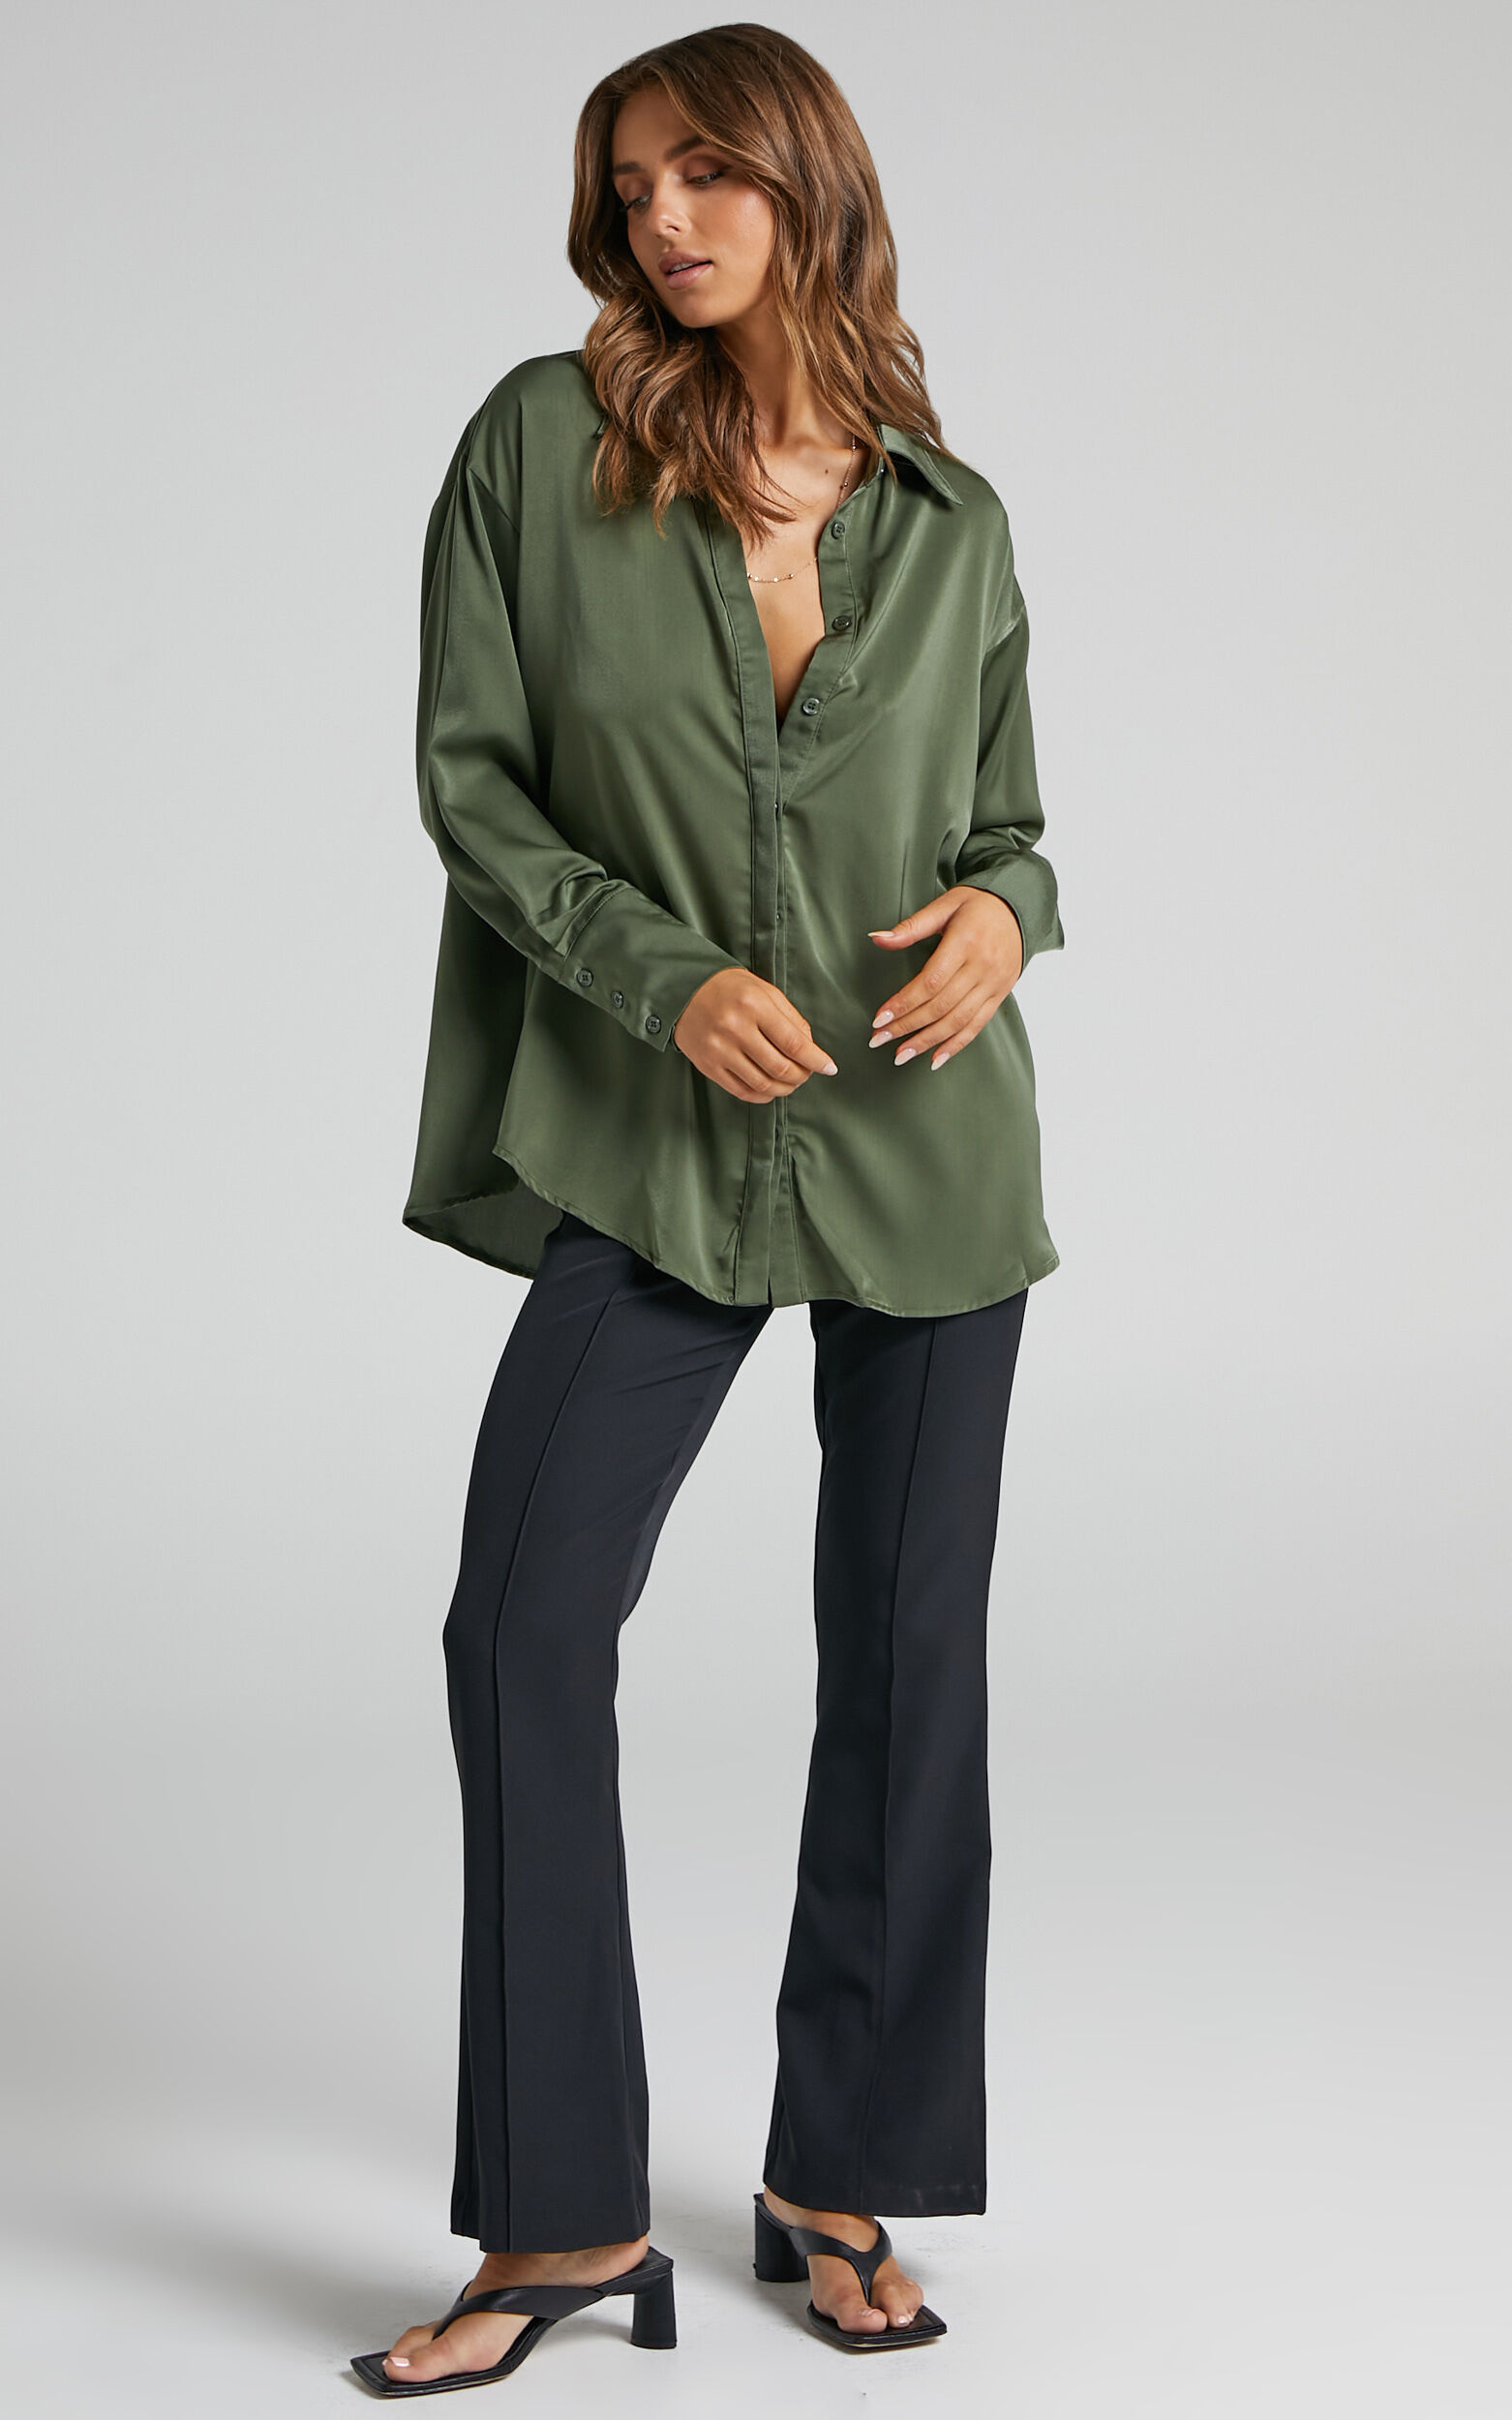 Azurine Oversized Button Up Shirt in Satin in Olive - 06, GRN1, super-hi-res image number null